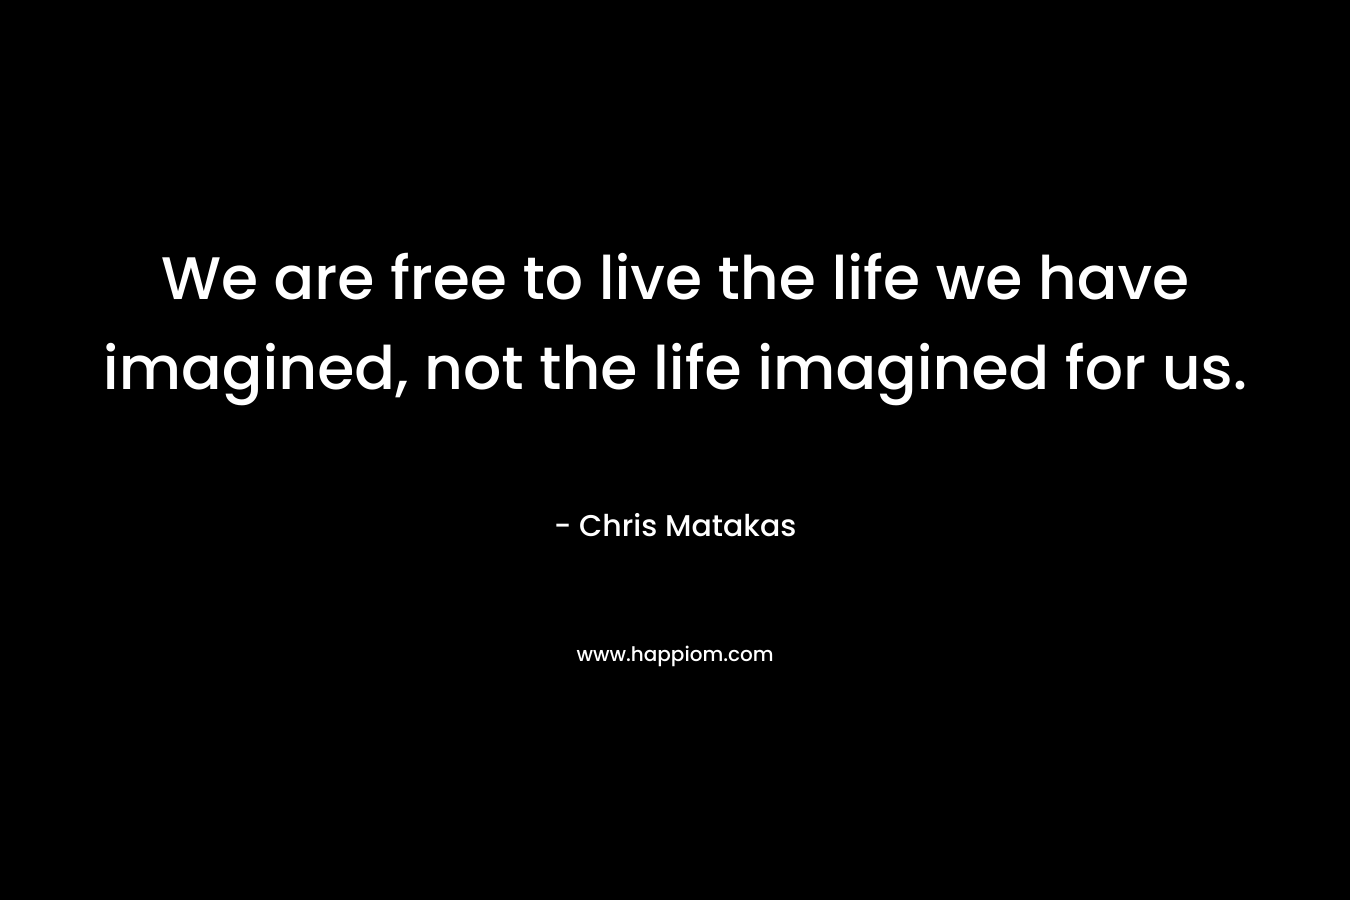 We are free to live the life we have imagined, not the life imagined for us.